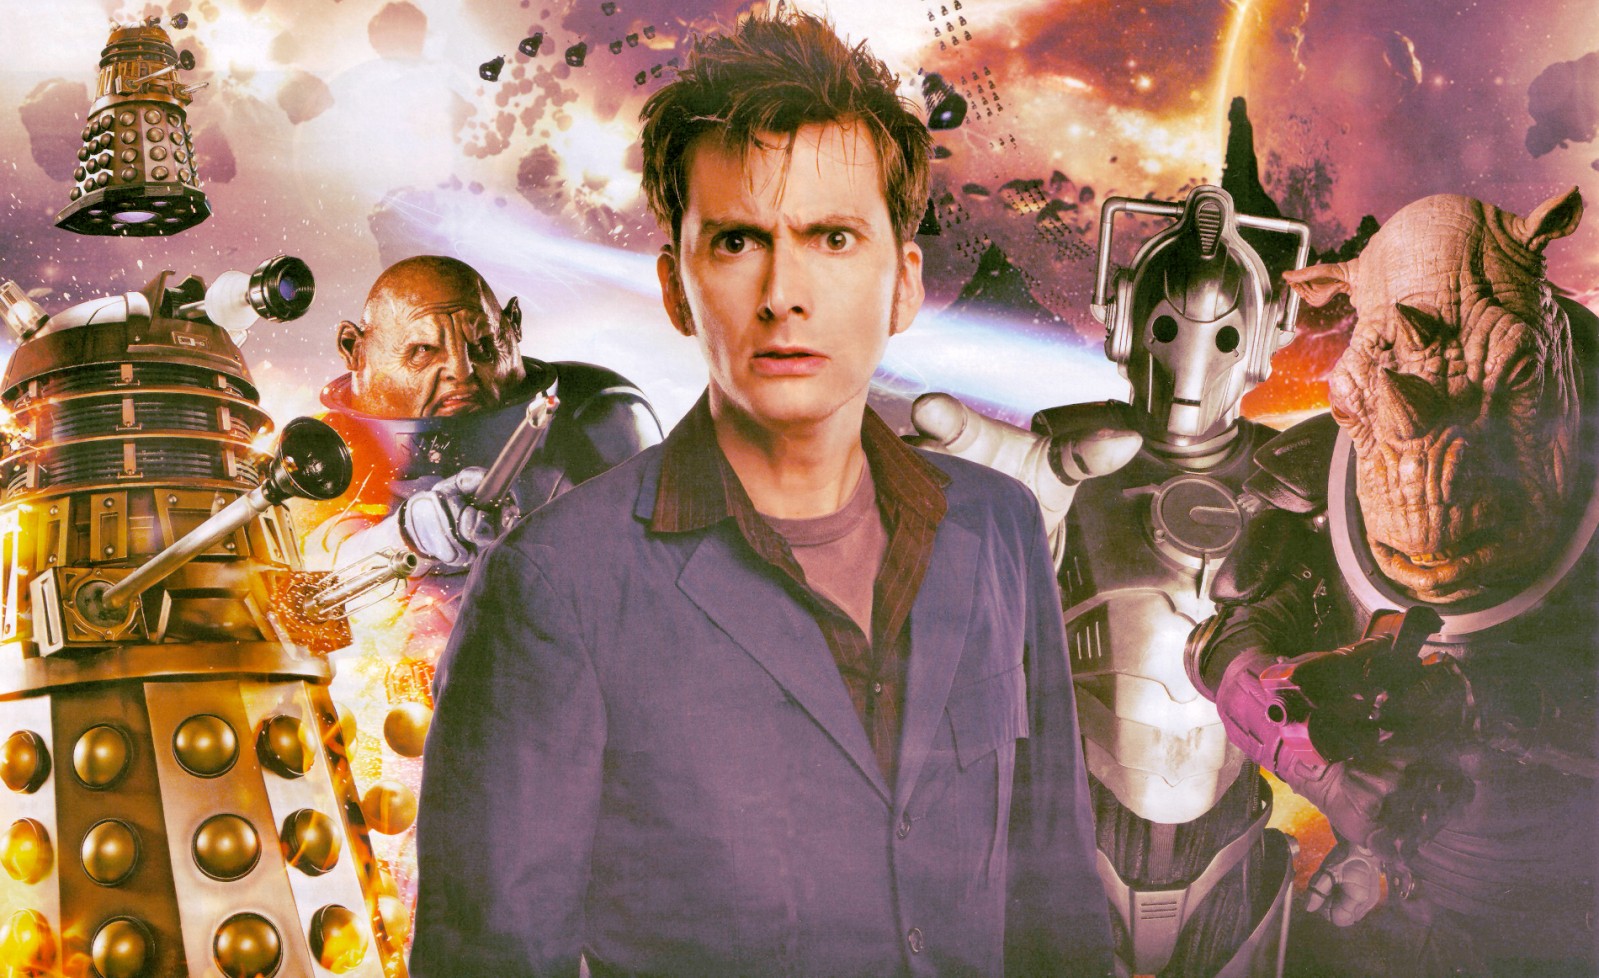 General 1599x978 Doctor Who The Doctor Daleks Cybermen David Tennant Tenth Doctor TV series science fiction